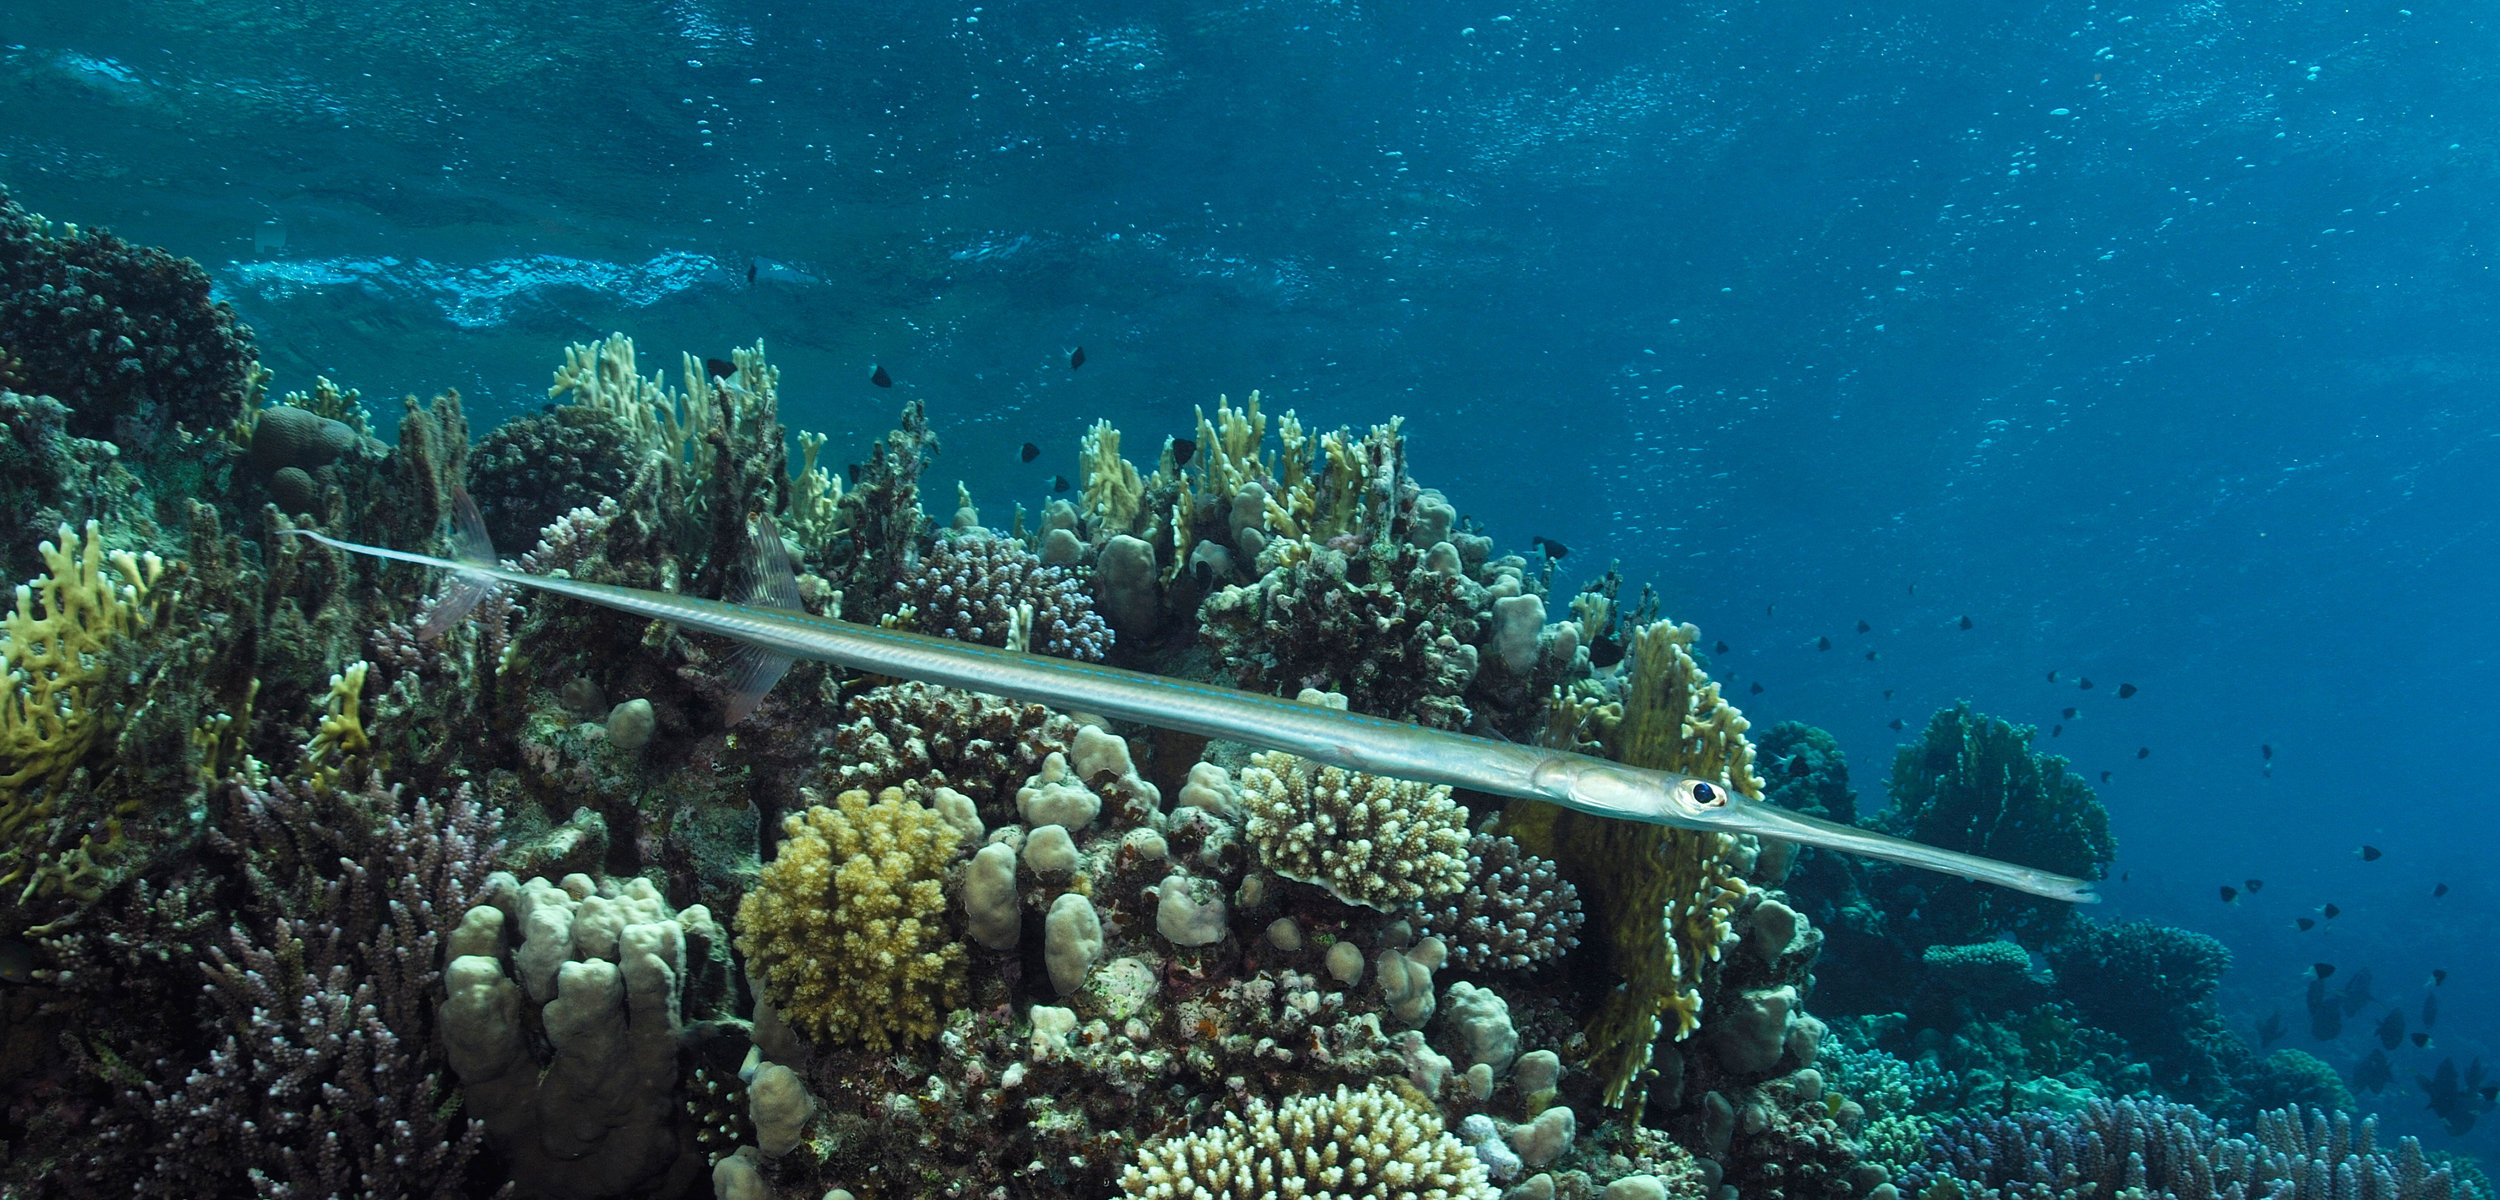 A long thin pencil like silvery fish blends in infront of corals in the background